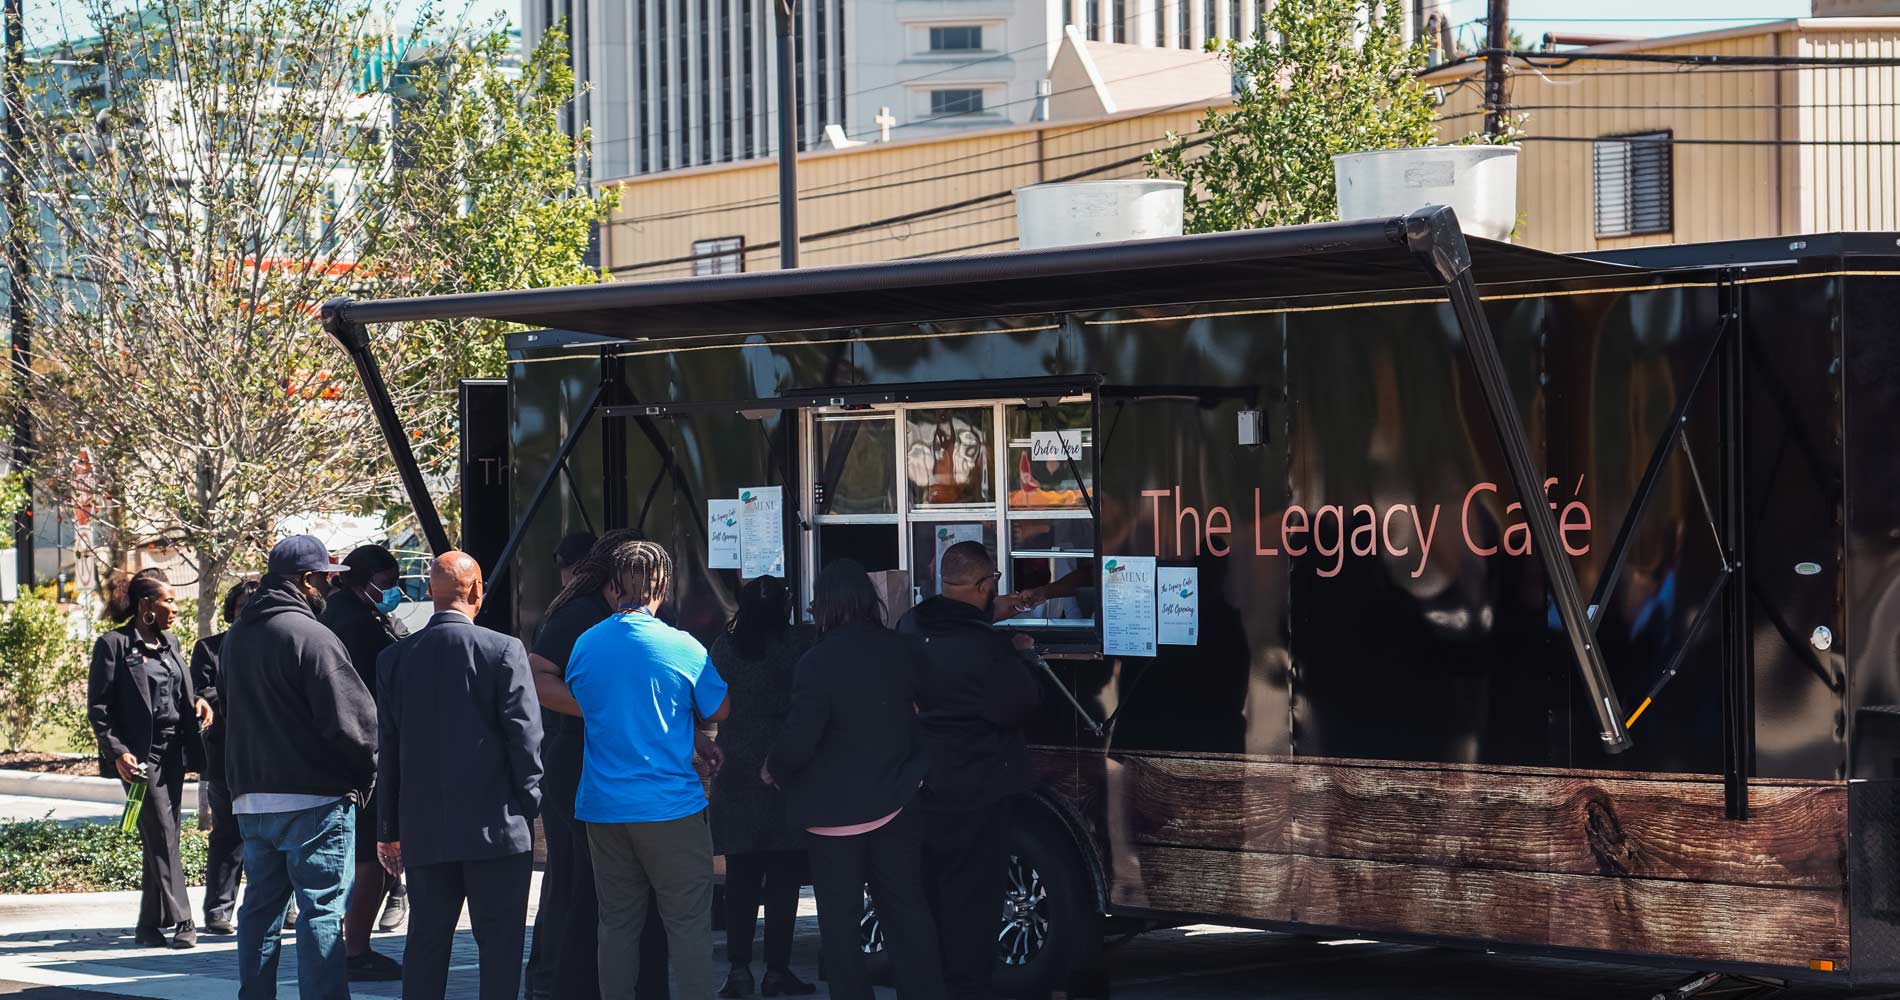 Visitors order a quick lunch from the Legacy Cafe, EJI's food truck located in Legacy Plaza, across the street from the museum.